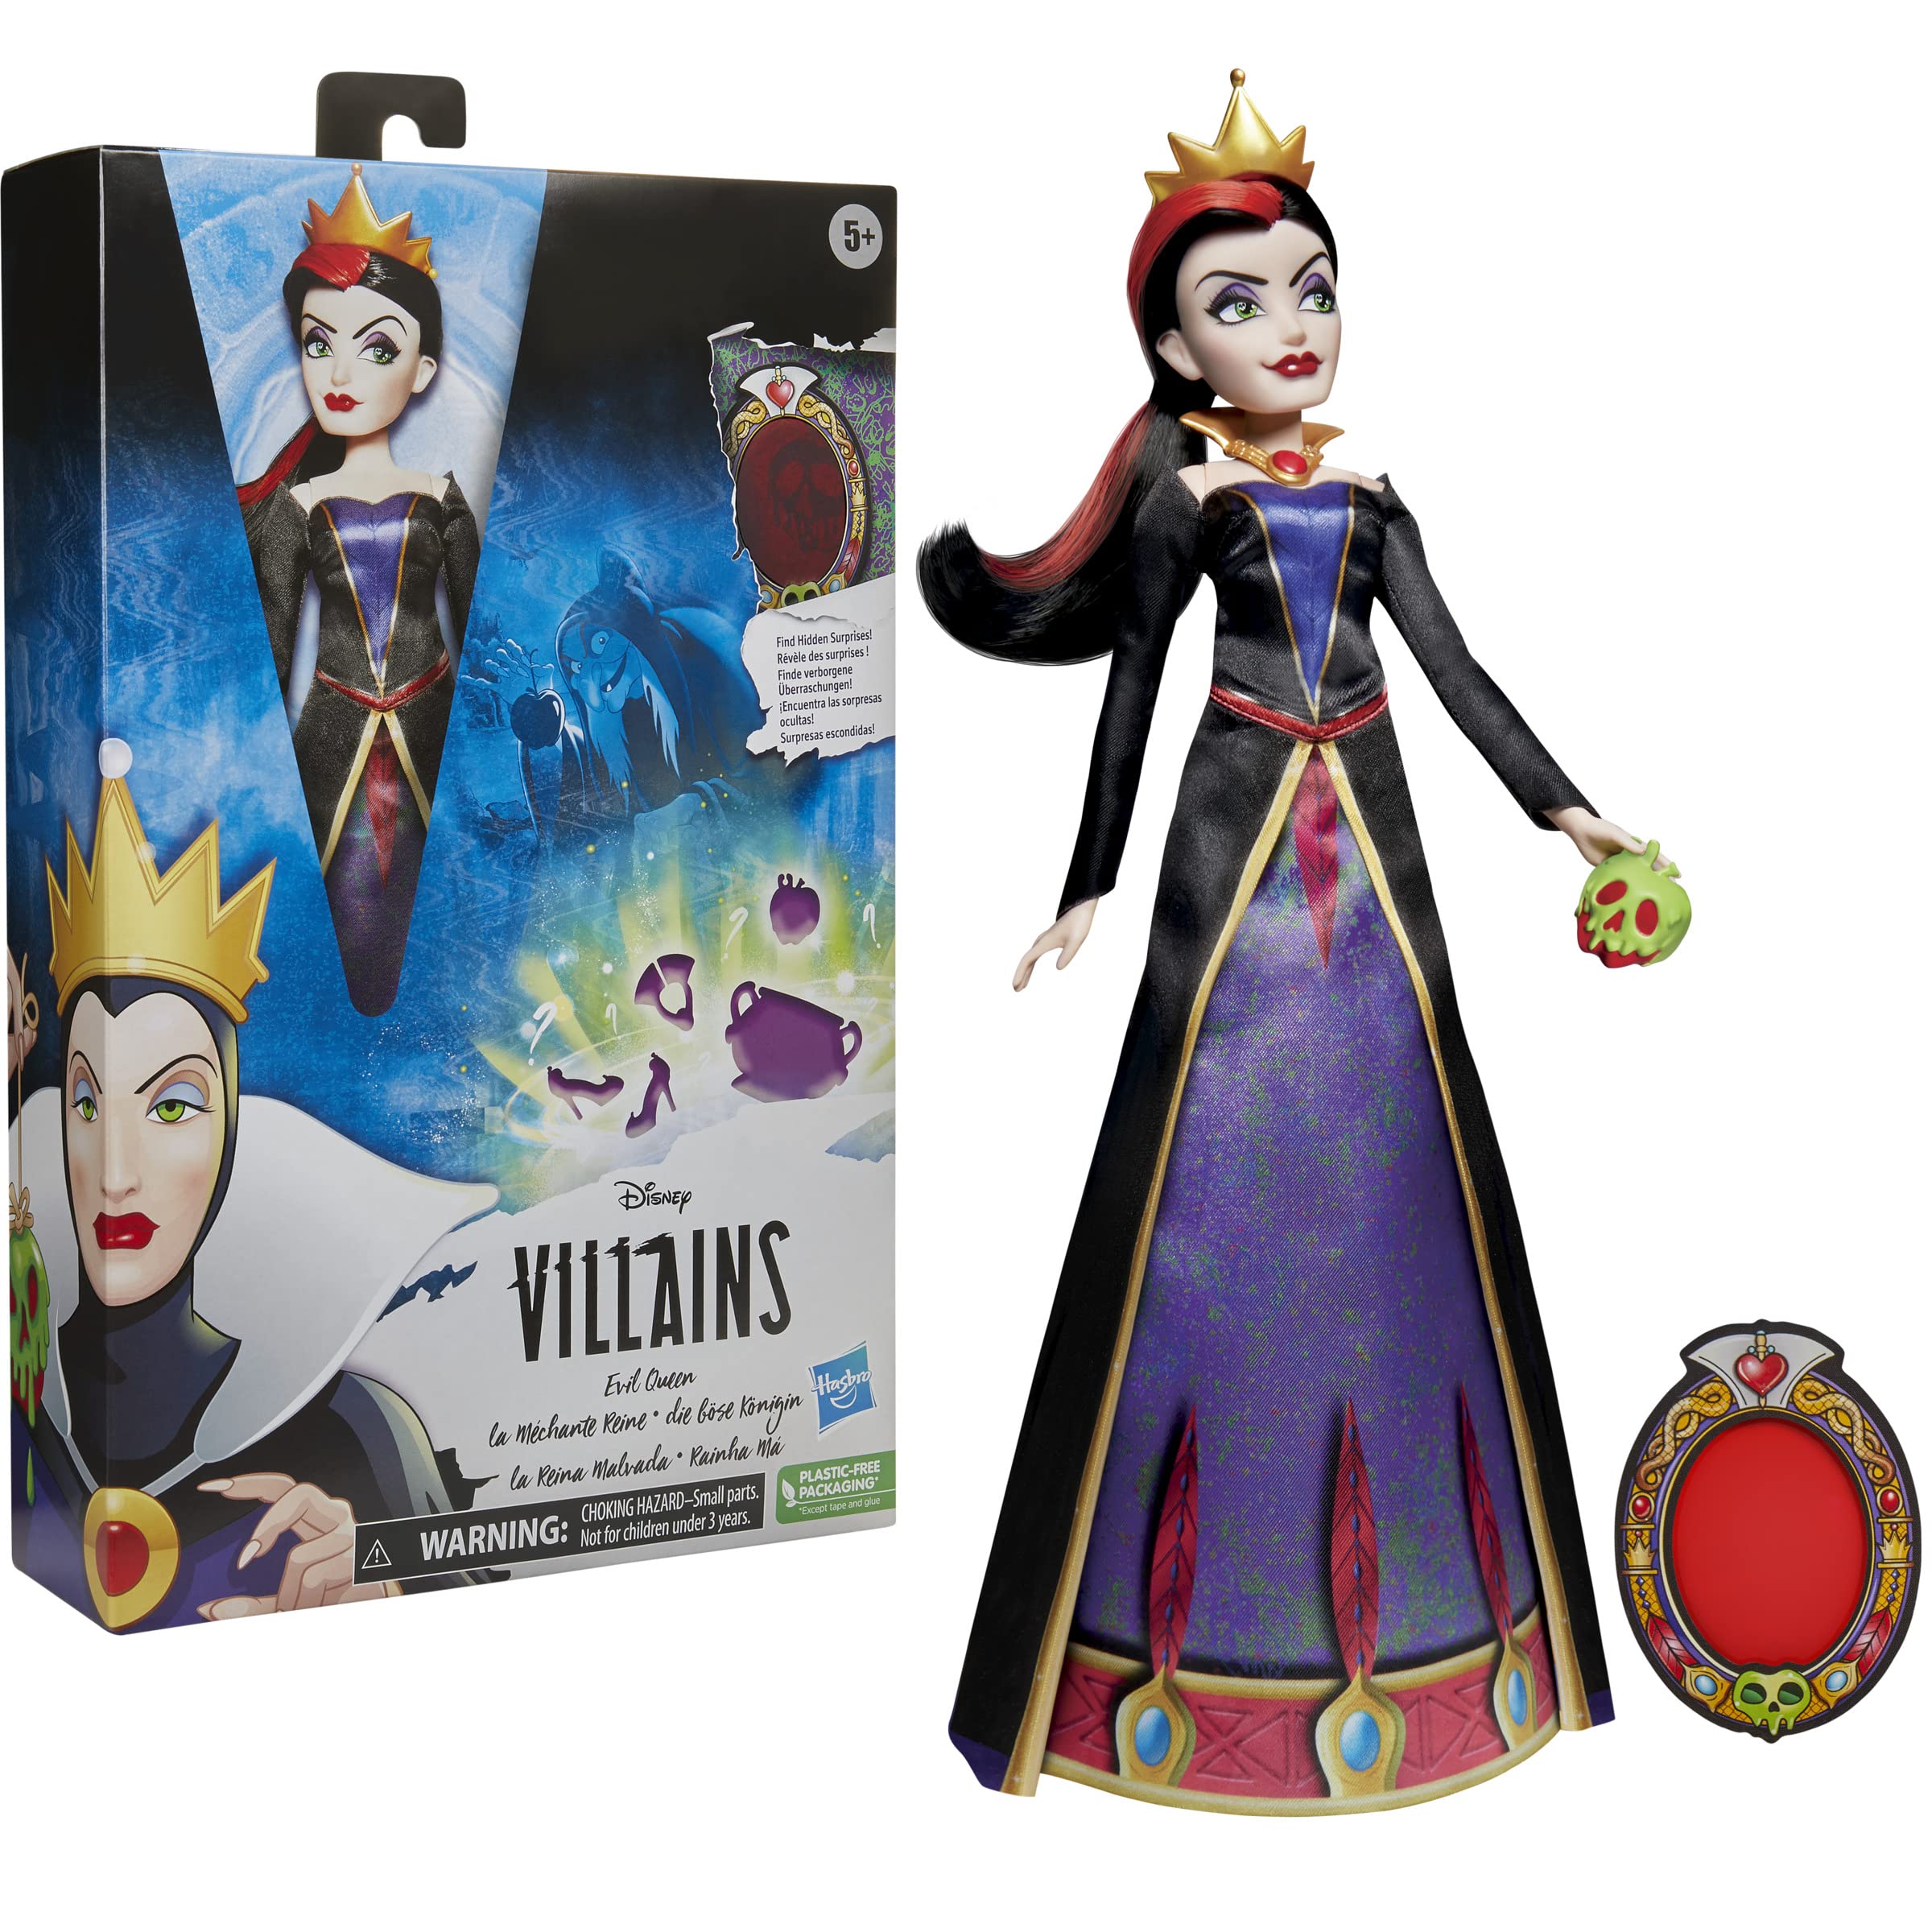 Disney Villains Evil Queen Fashion Doll, Accessories and Removable Clothes, Disney Villains Toy for Kids 5 Years Old and Up